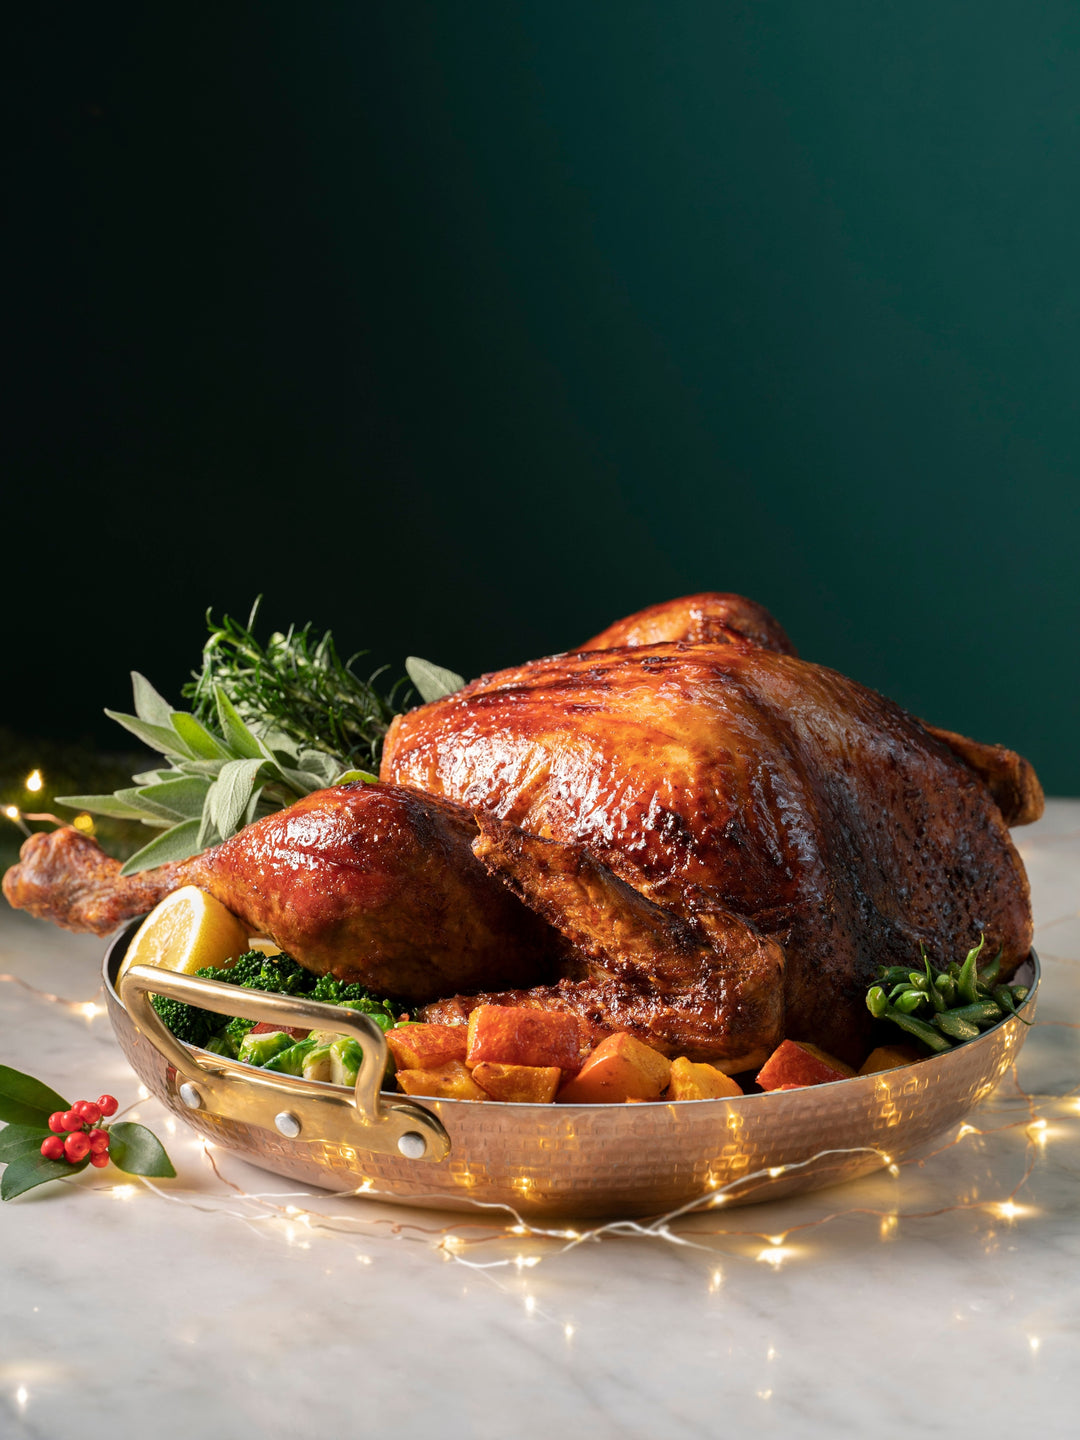 BACI TURKEY FEAST (PICK-UP & DELIVERY)